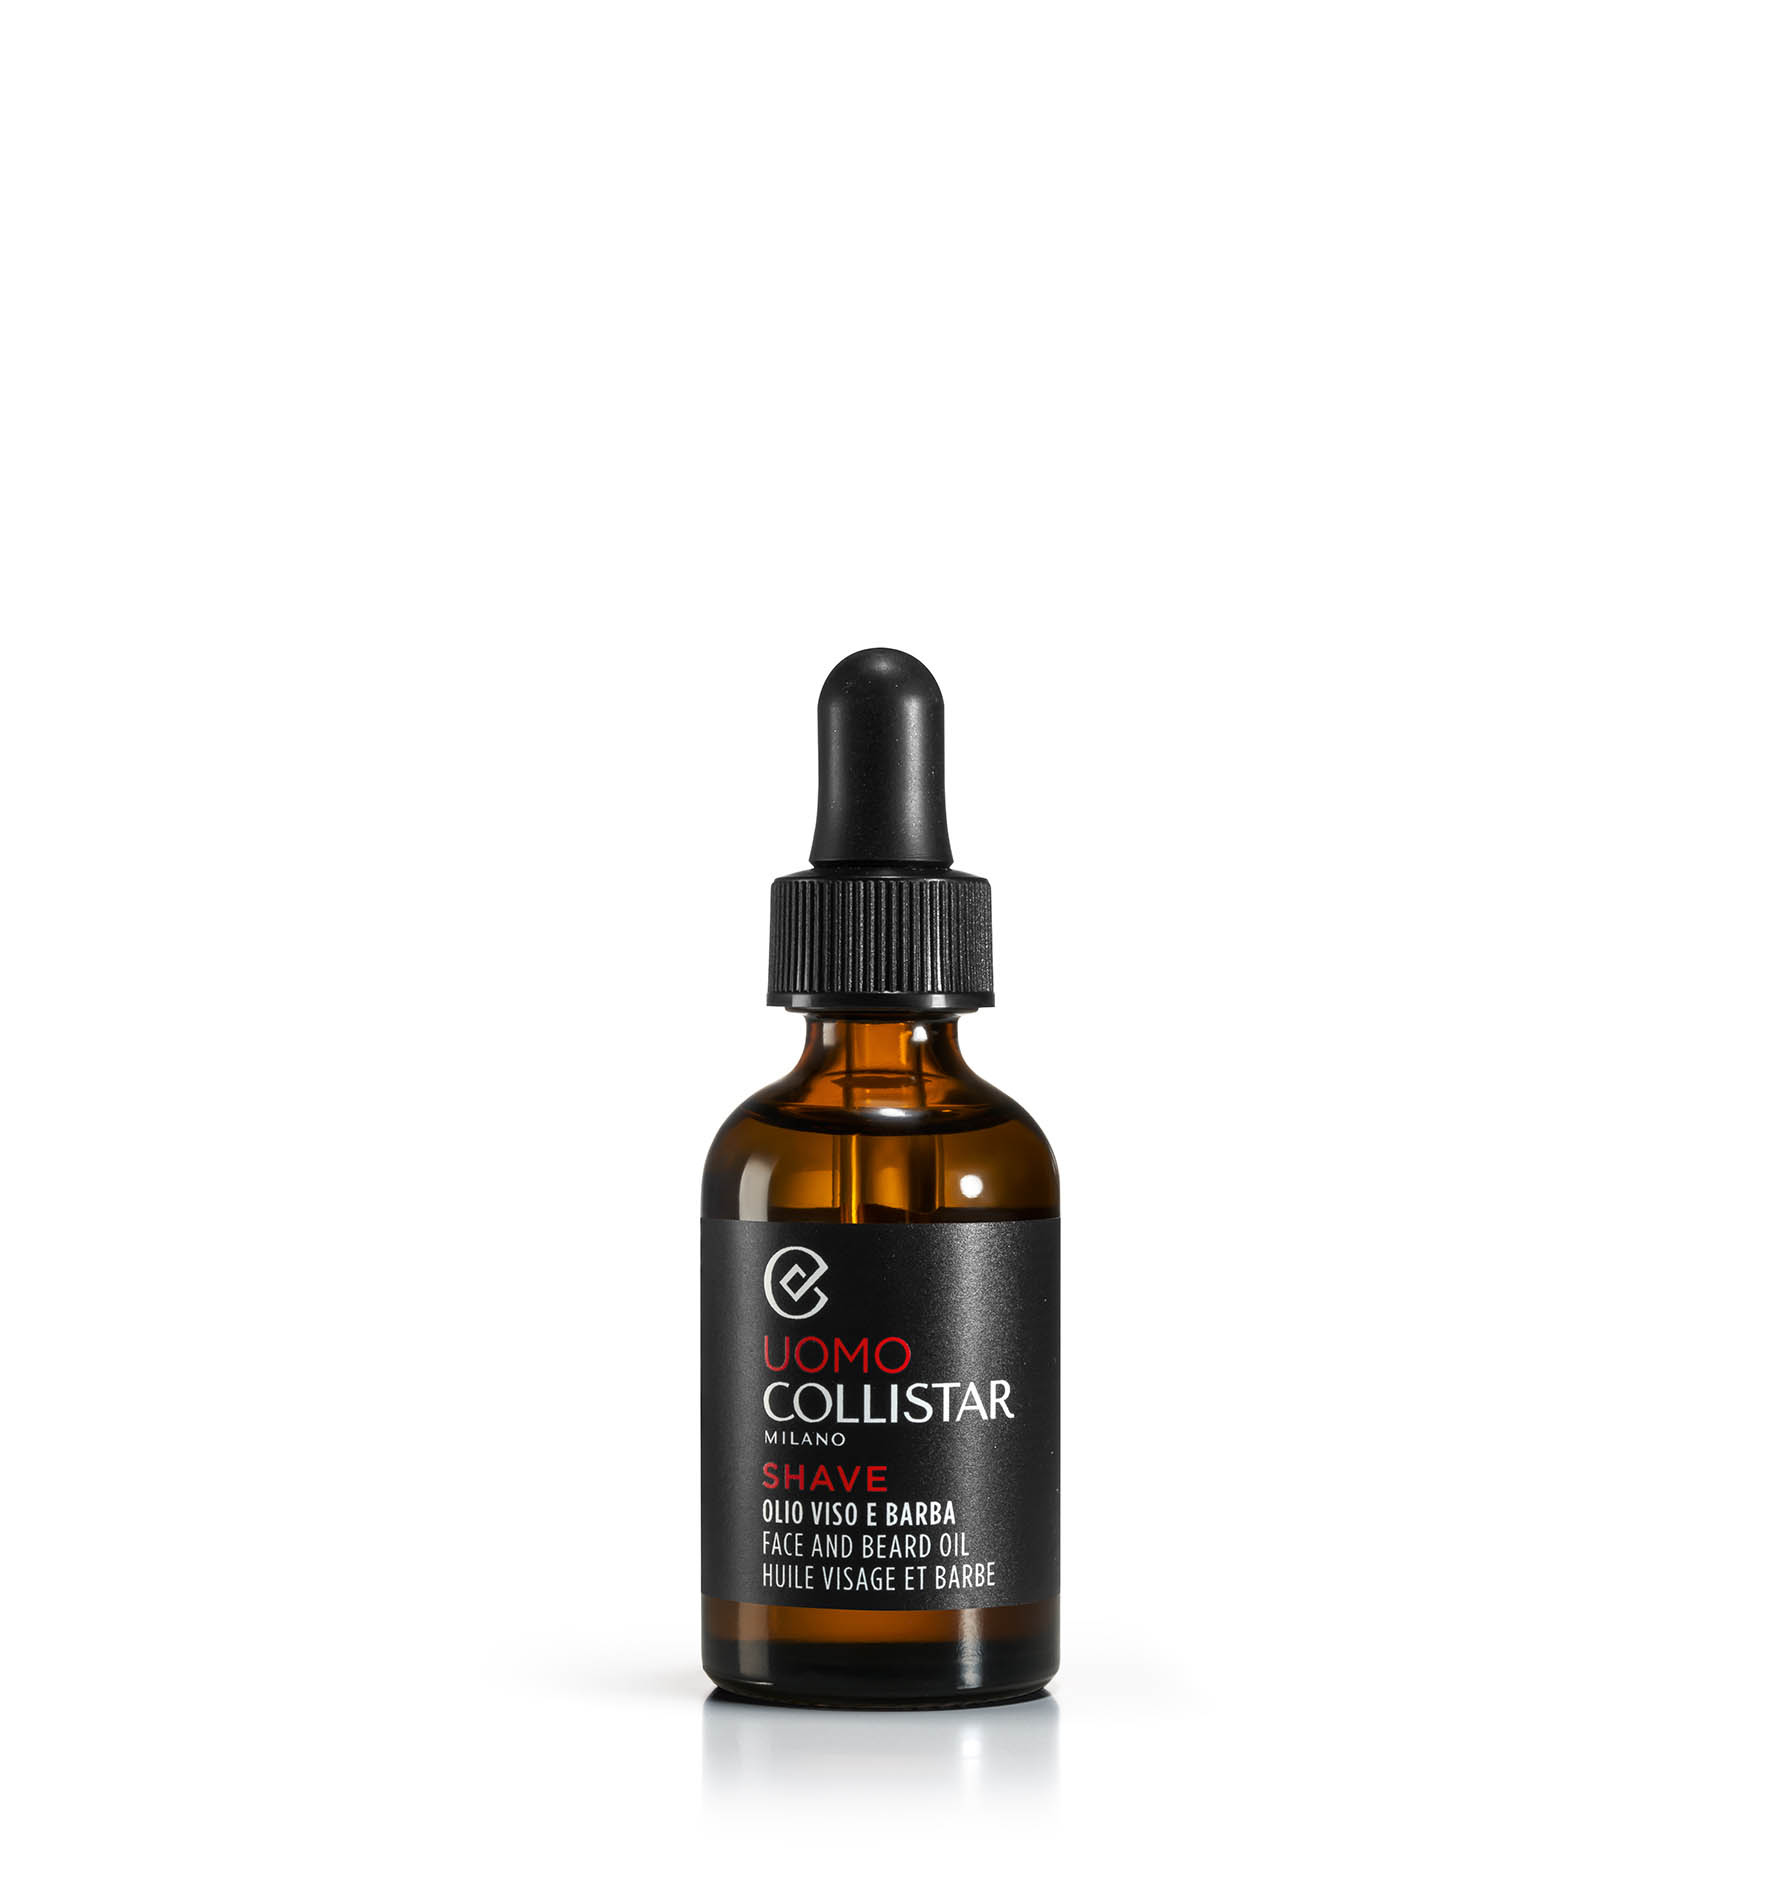 FACE AND BEARD OIL - Shaving and After shave | Collistar - Shop Online Ufficiale